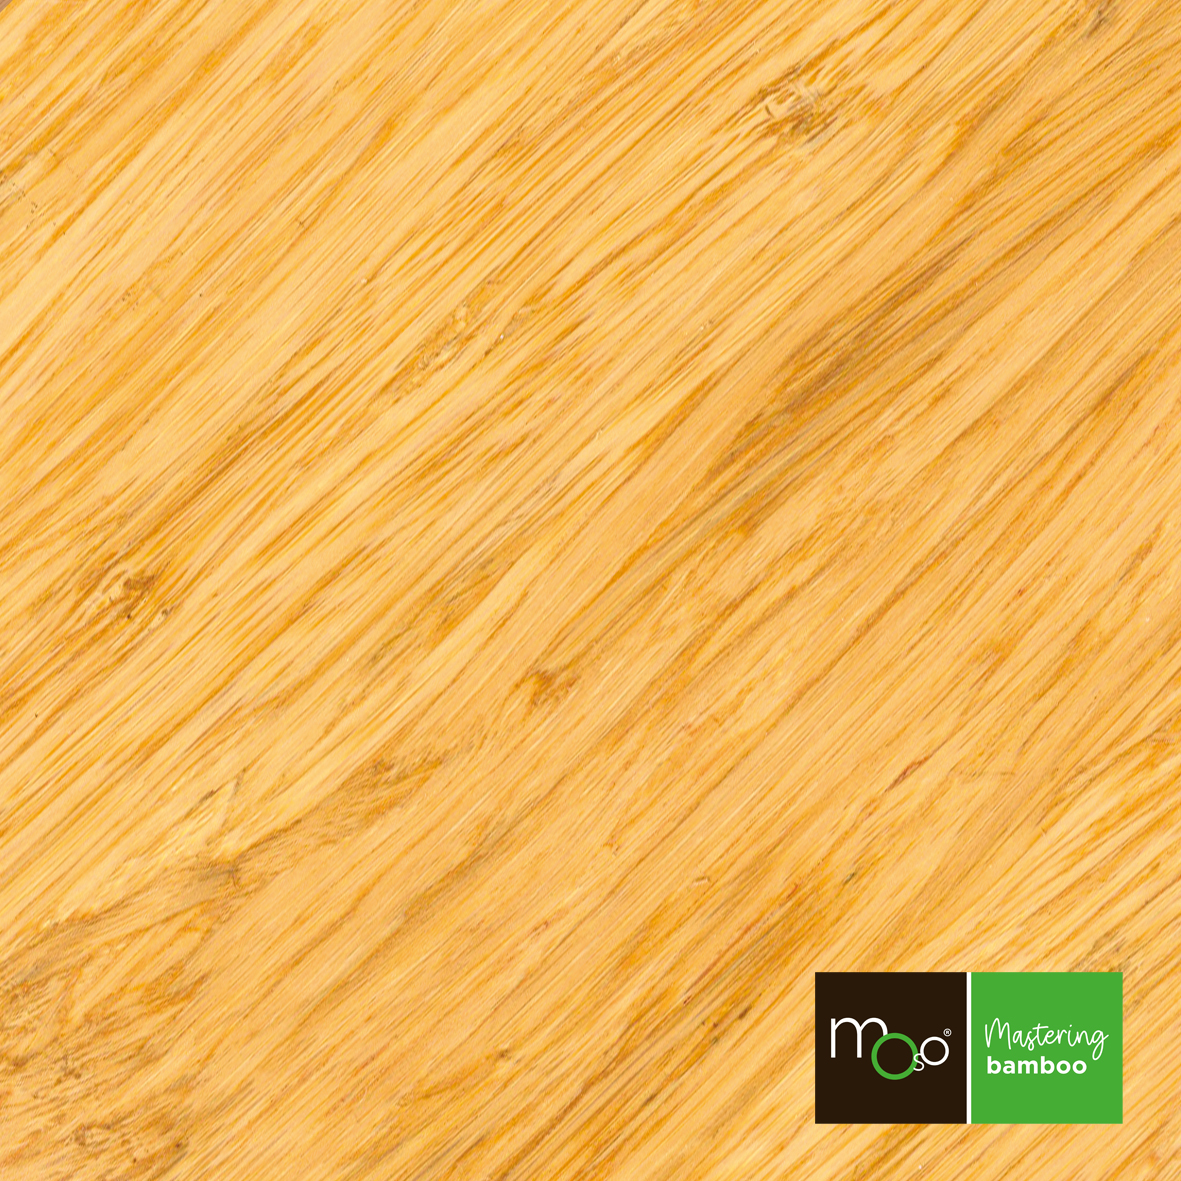 Bamboo nature light density solid-plank